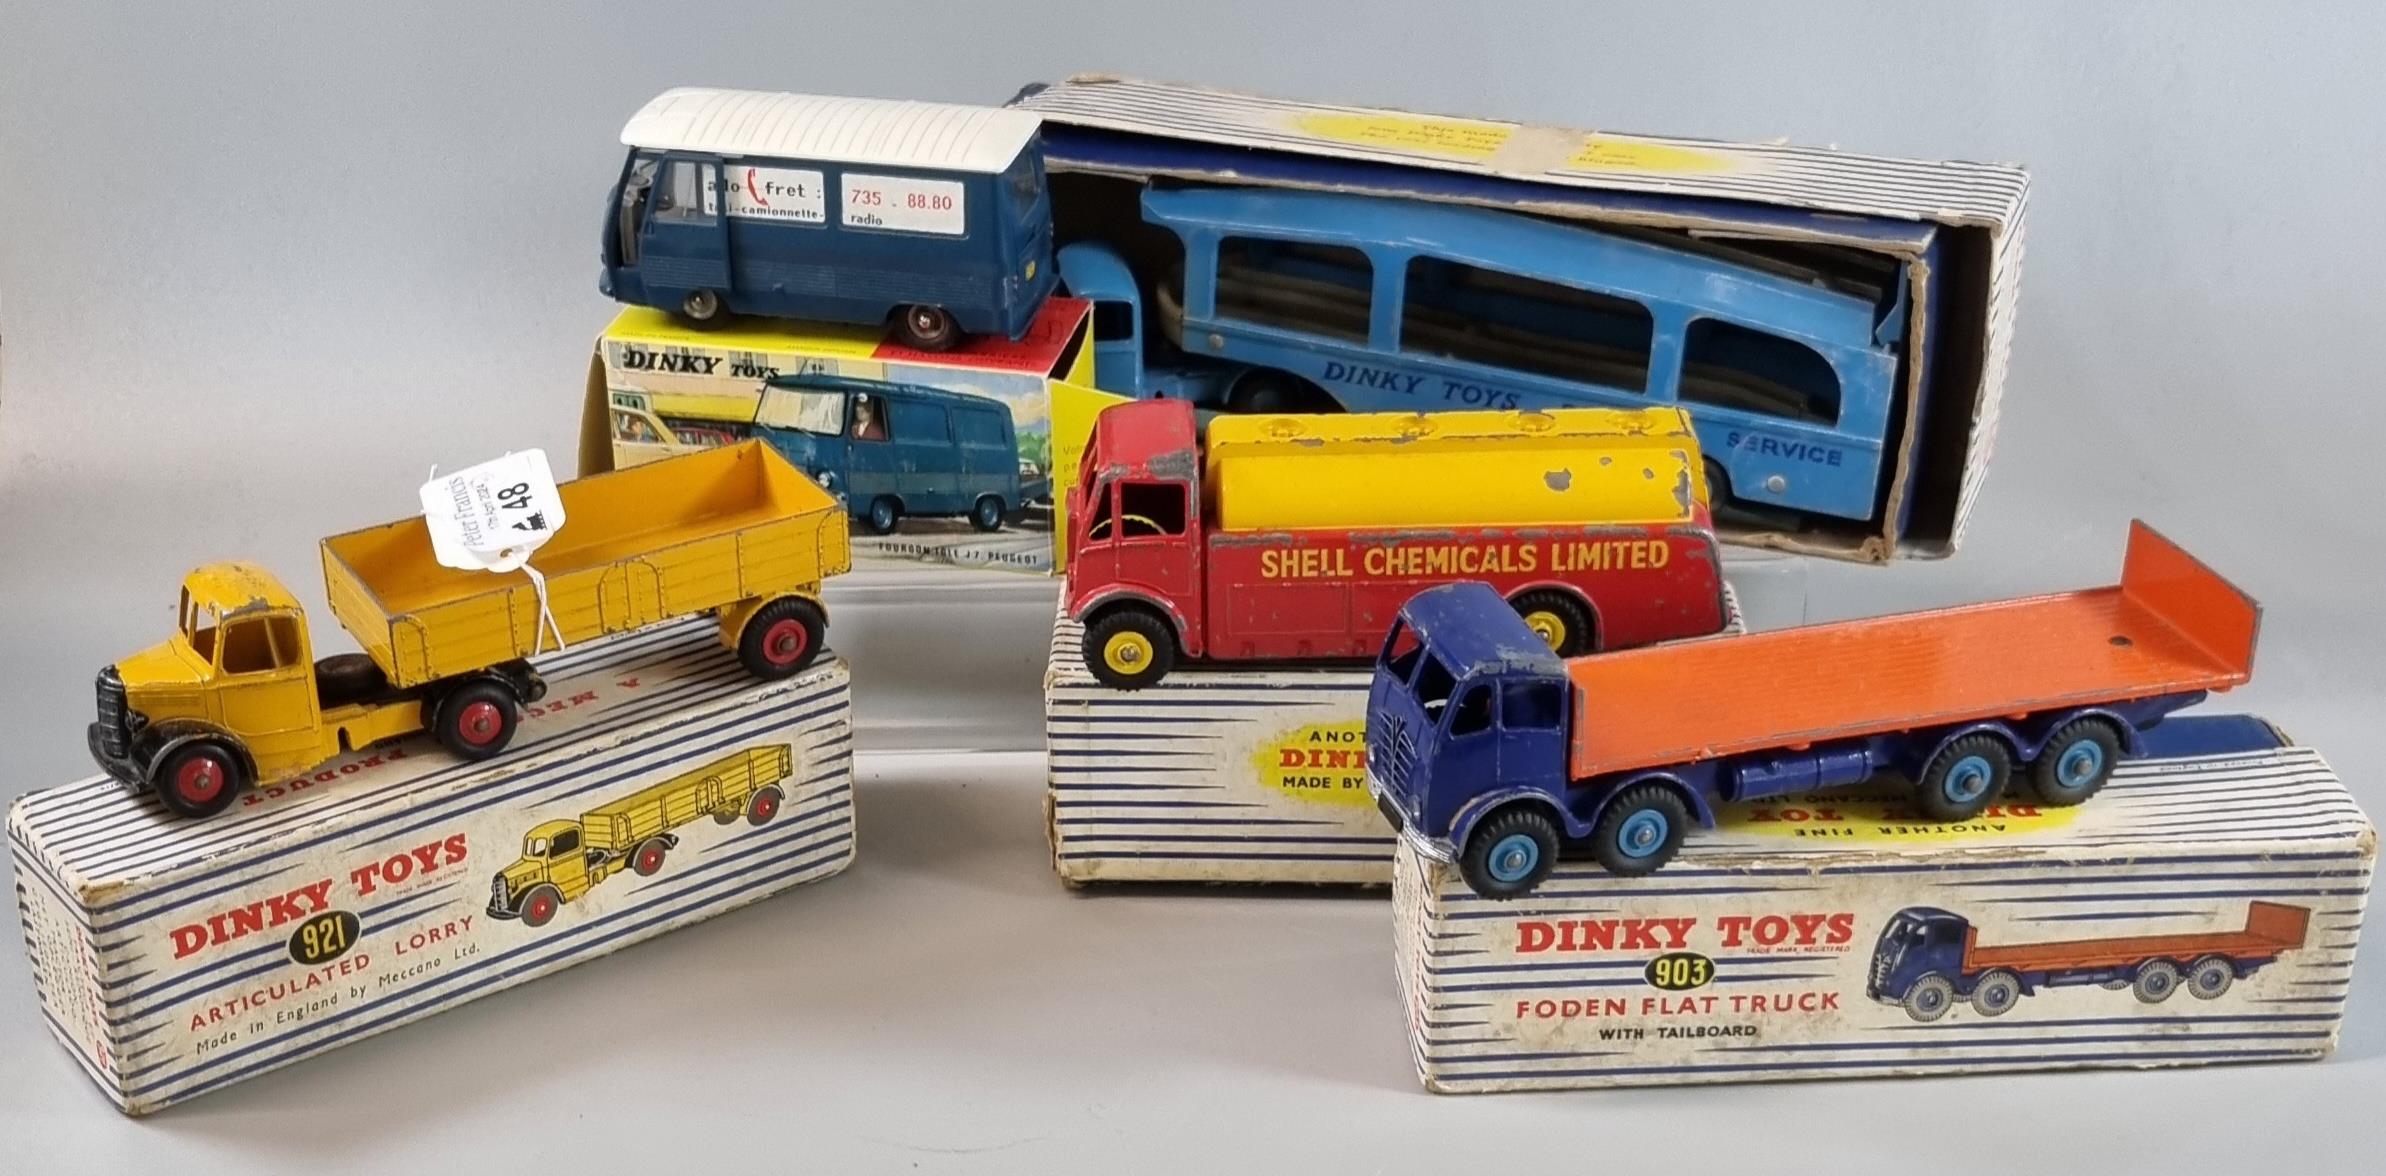 Collection of vintage Dinky Toy diecast model vehicles, all in original boxes to include: 921